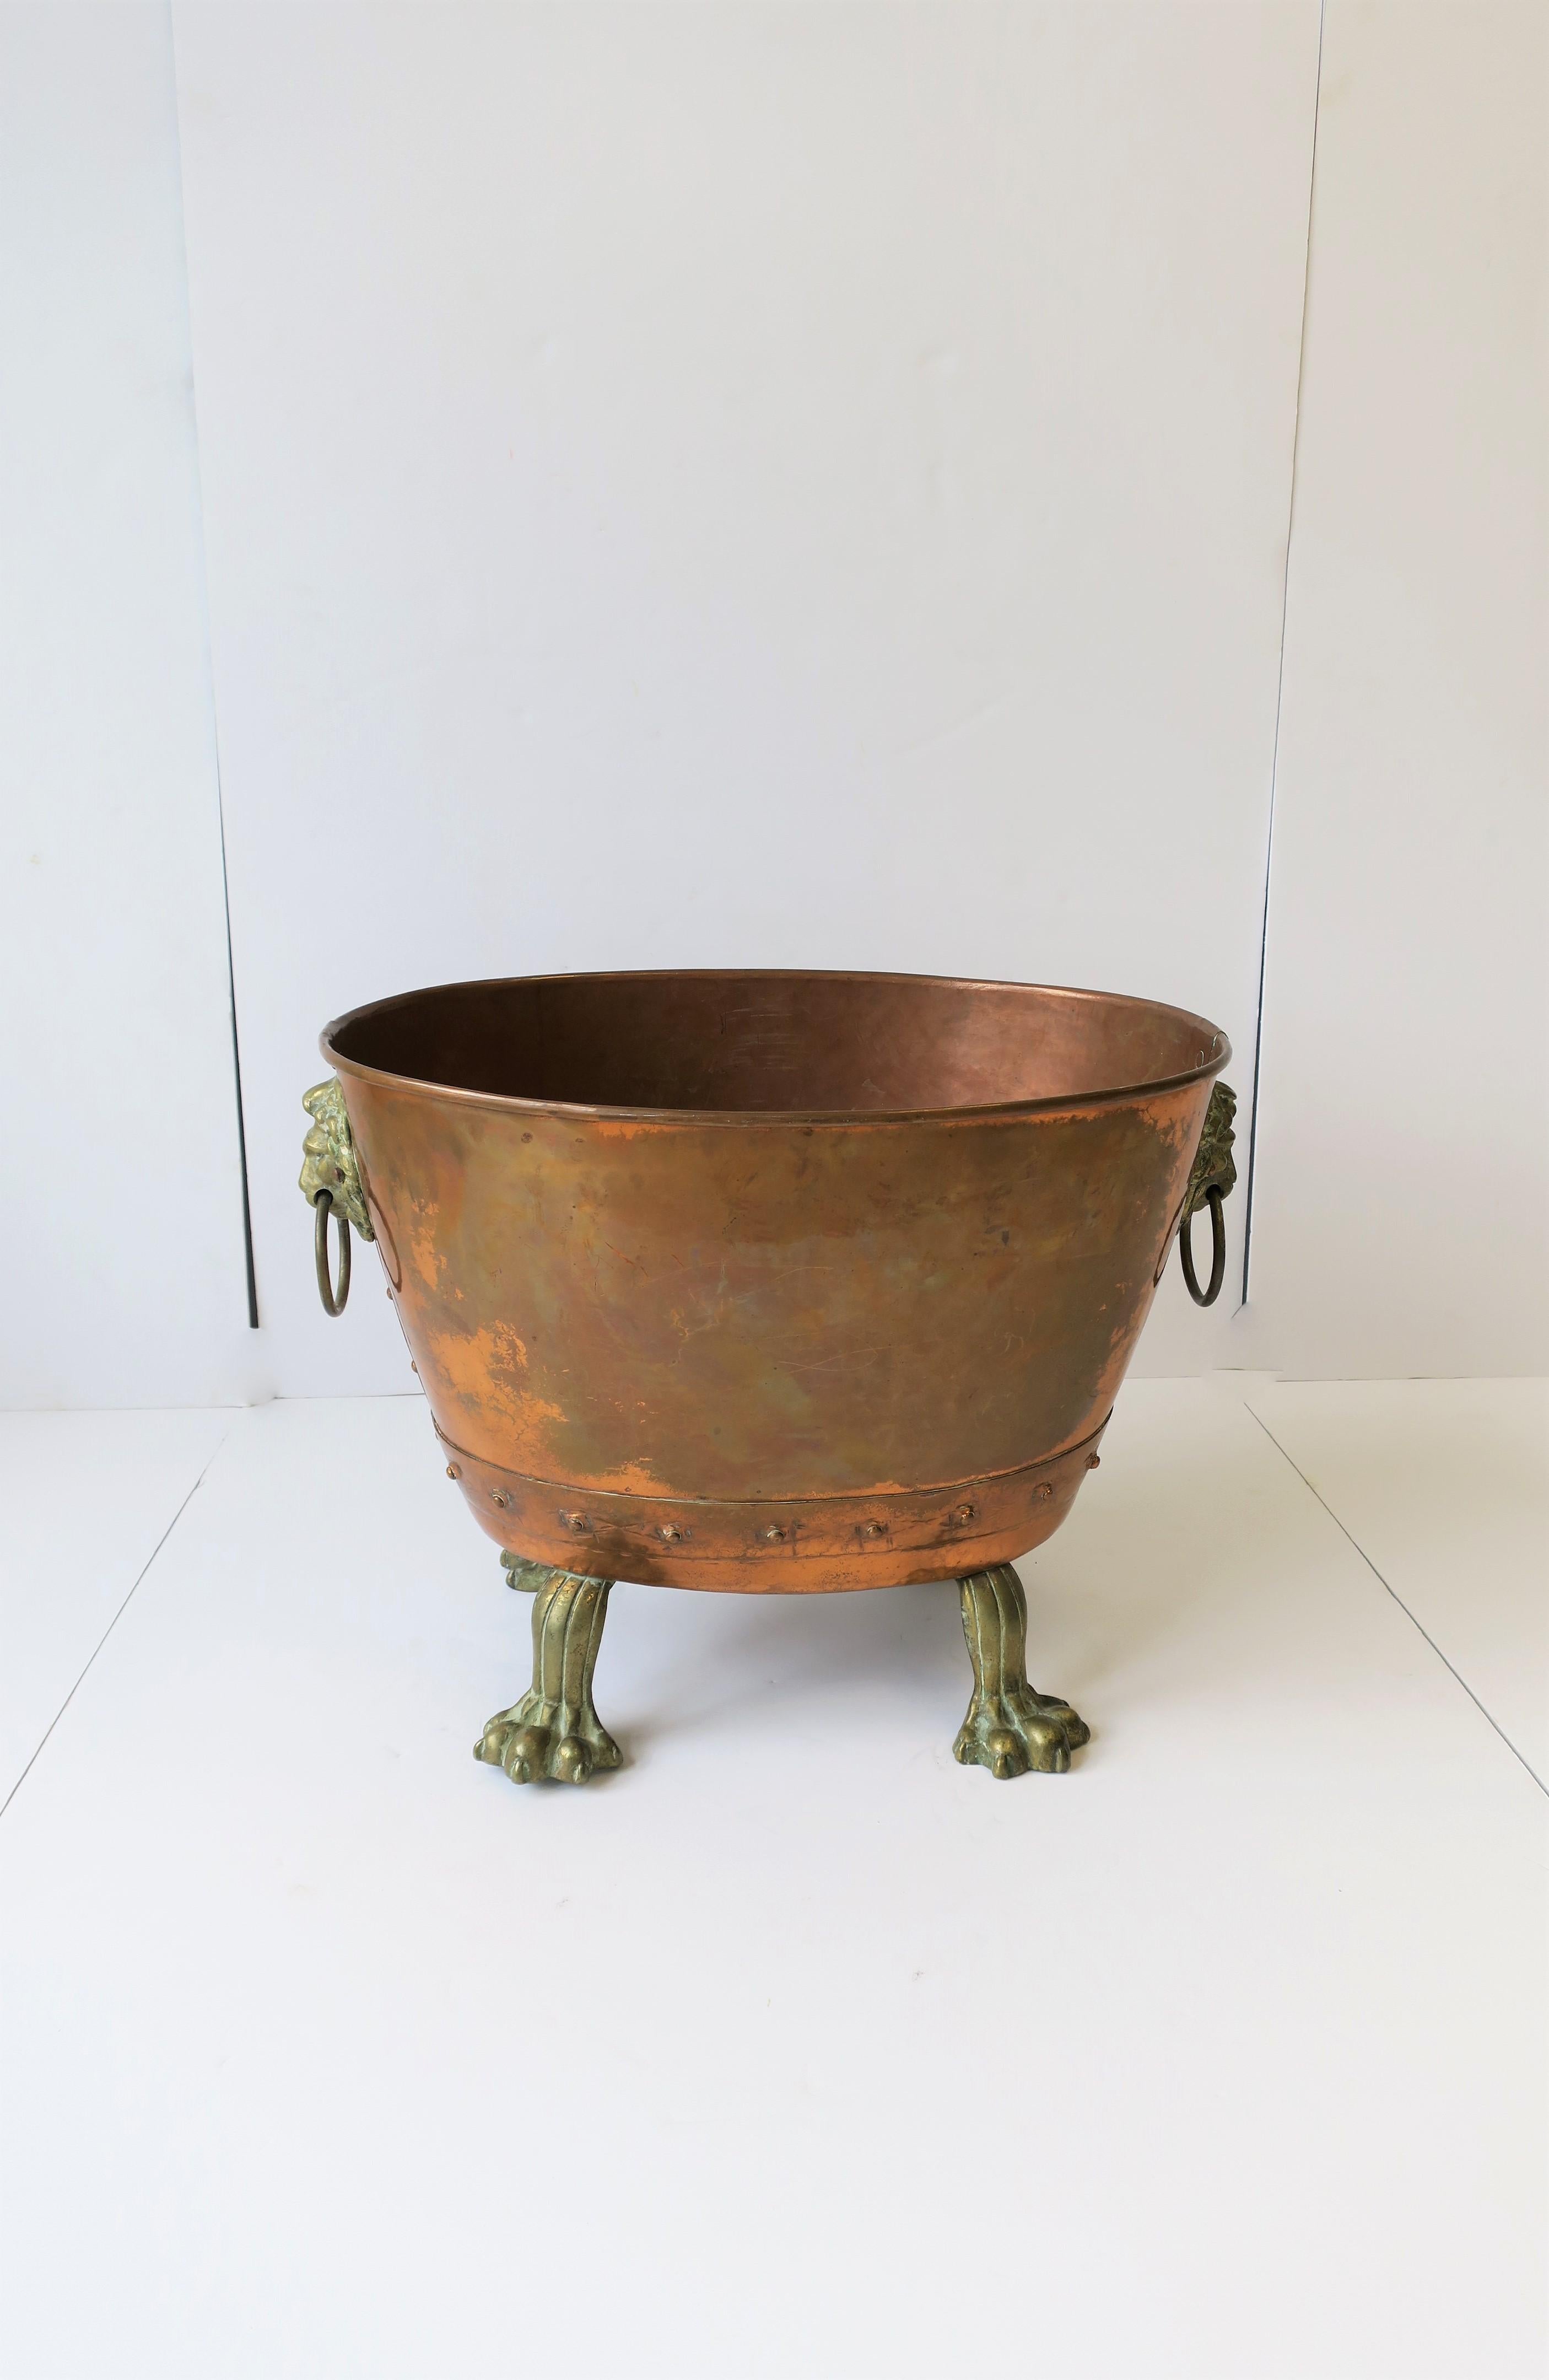 A beautiful and substantial turn-of-the-century English Lion head and paw feet copper and bronze/brass oval pot. Detailed lion heads on either side with ring handles, four paw feet, and rivets along base. Hand-hammered, England, circa early 20th